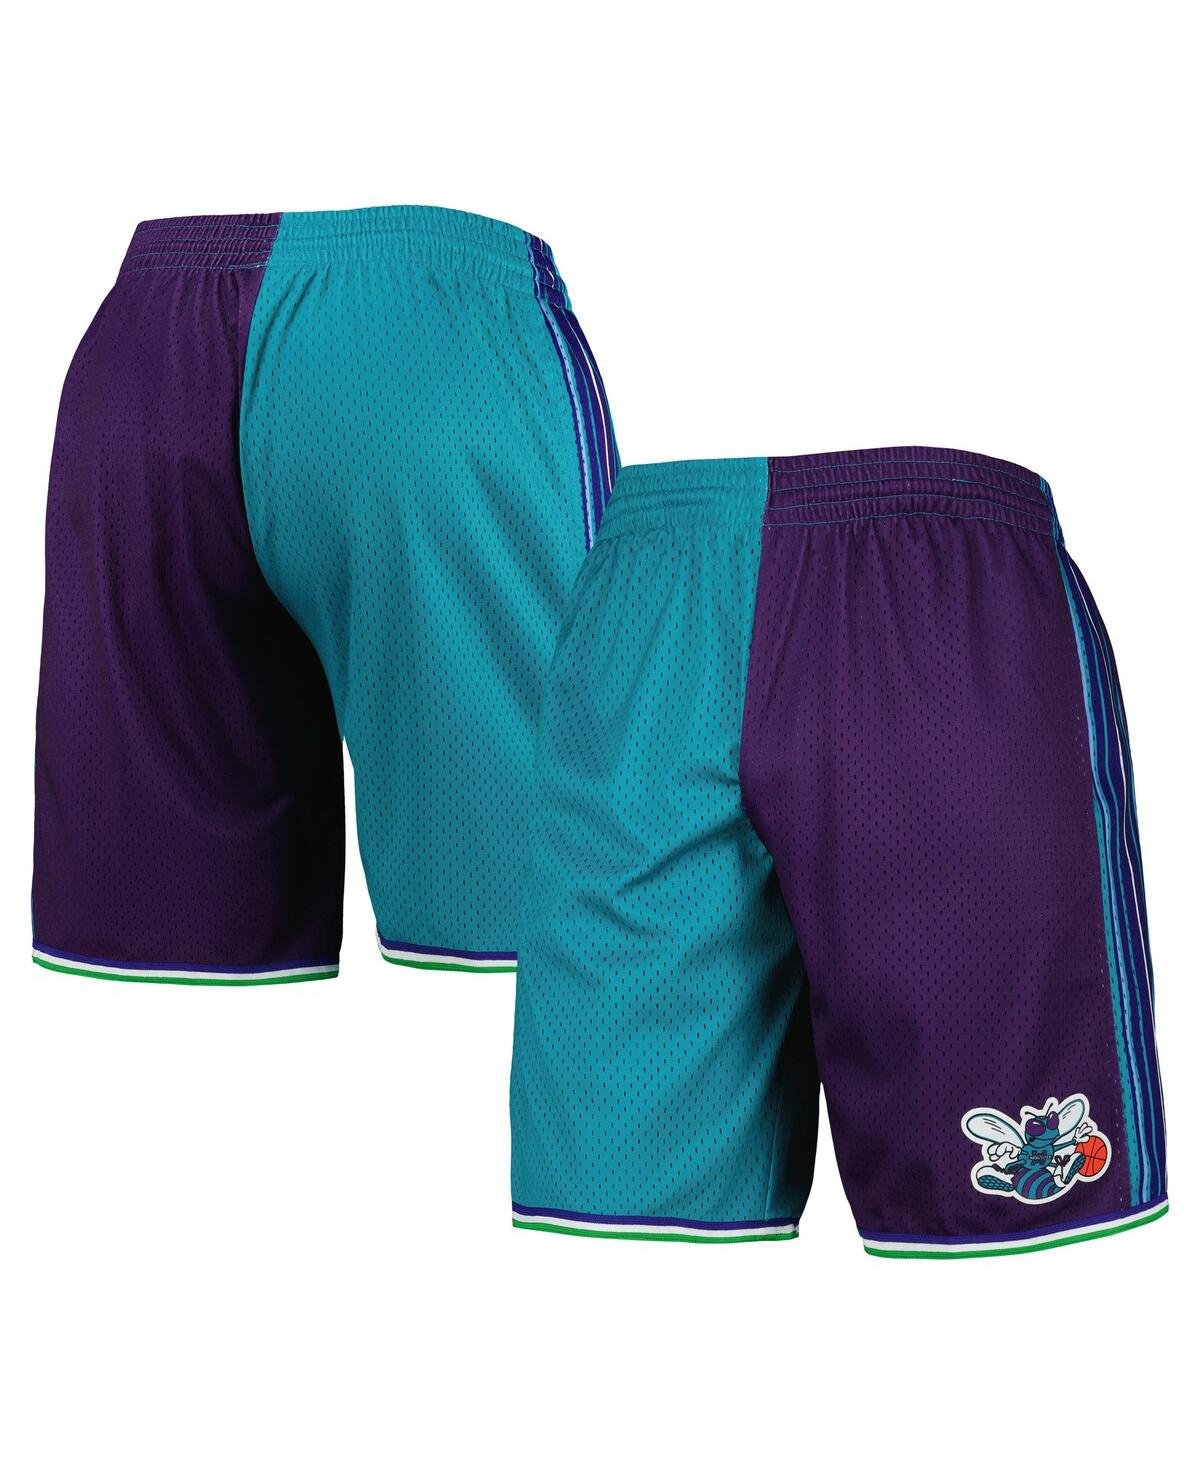 Mitchell & Ness Men's Vancouver Grizzlies Reload Collection Swingman Shorts  - Macy's